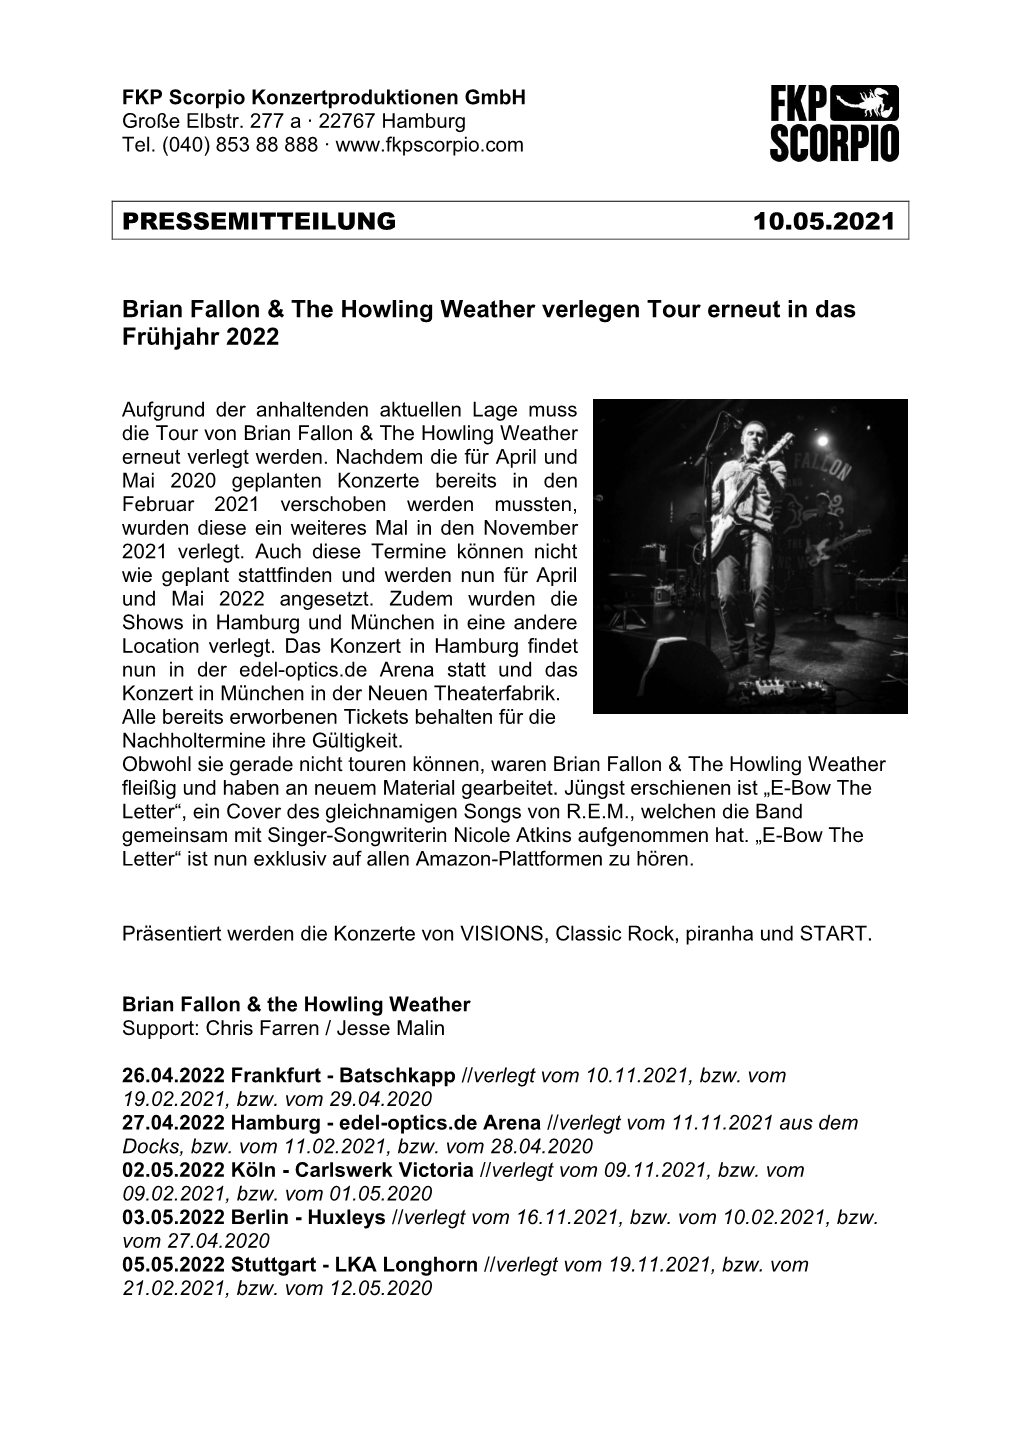 PRESSEMITTEILUNG 10.05.2021 Brian Fallon & the Howling